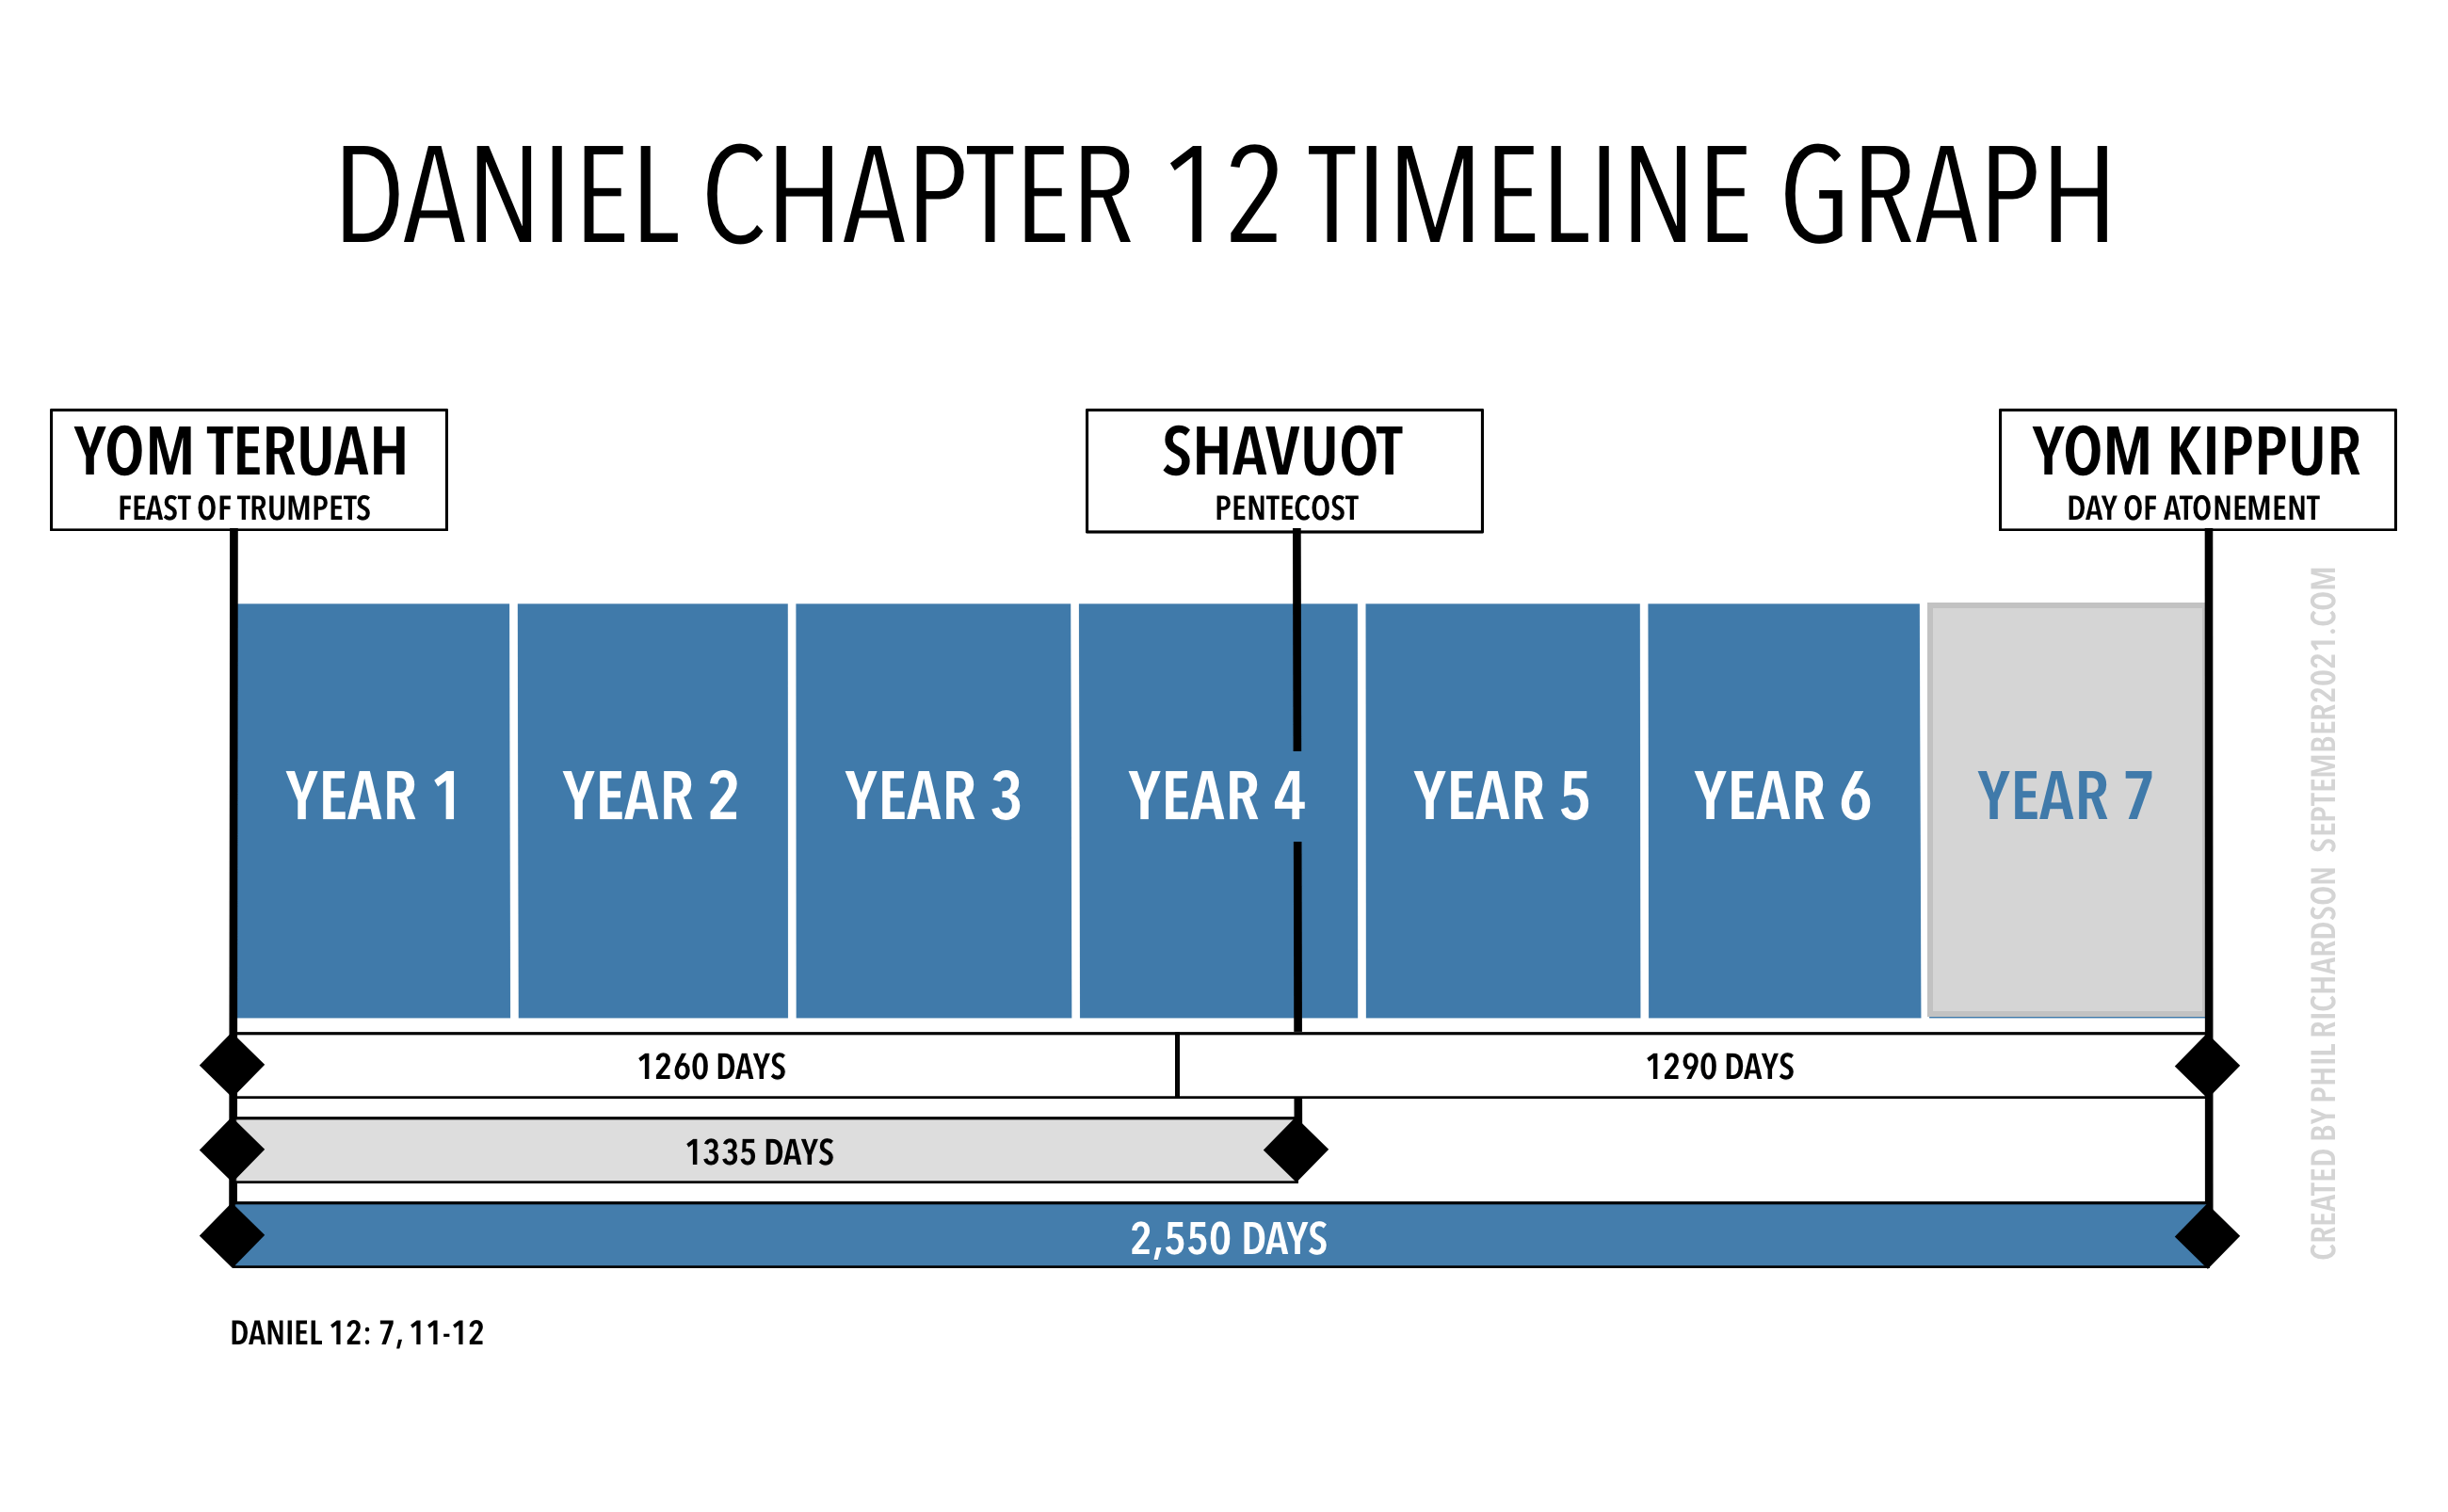 THE DANIEL CHAPTER 12 TIMELINE REPRESENTS 1260, 1290 AND 1335 DAYS FROM THE FEASTS OF YOM TERUAH (FEAST OF TRUMPETS) TO YOM KIPPUR (DAY OF ATONEMENT) OVER A 2,550 DAY PERIOD. AND, 1335 DAYS FROM YOM TERUAH TO SHAVUOT.